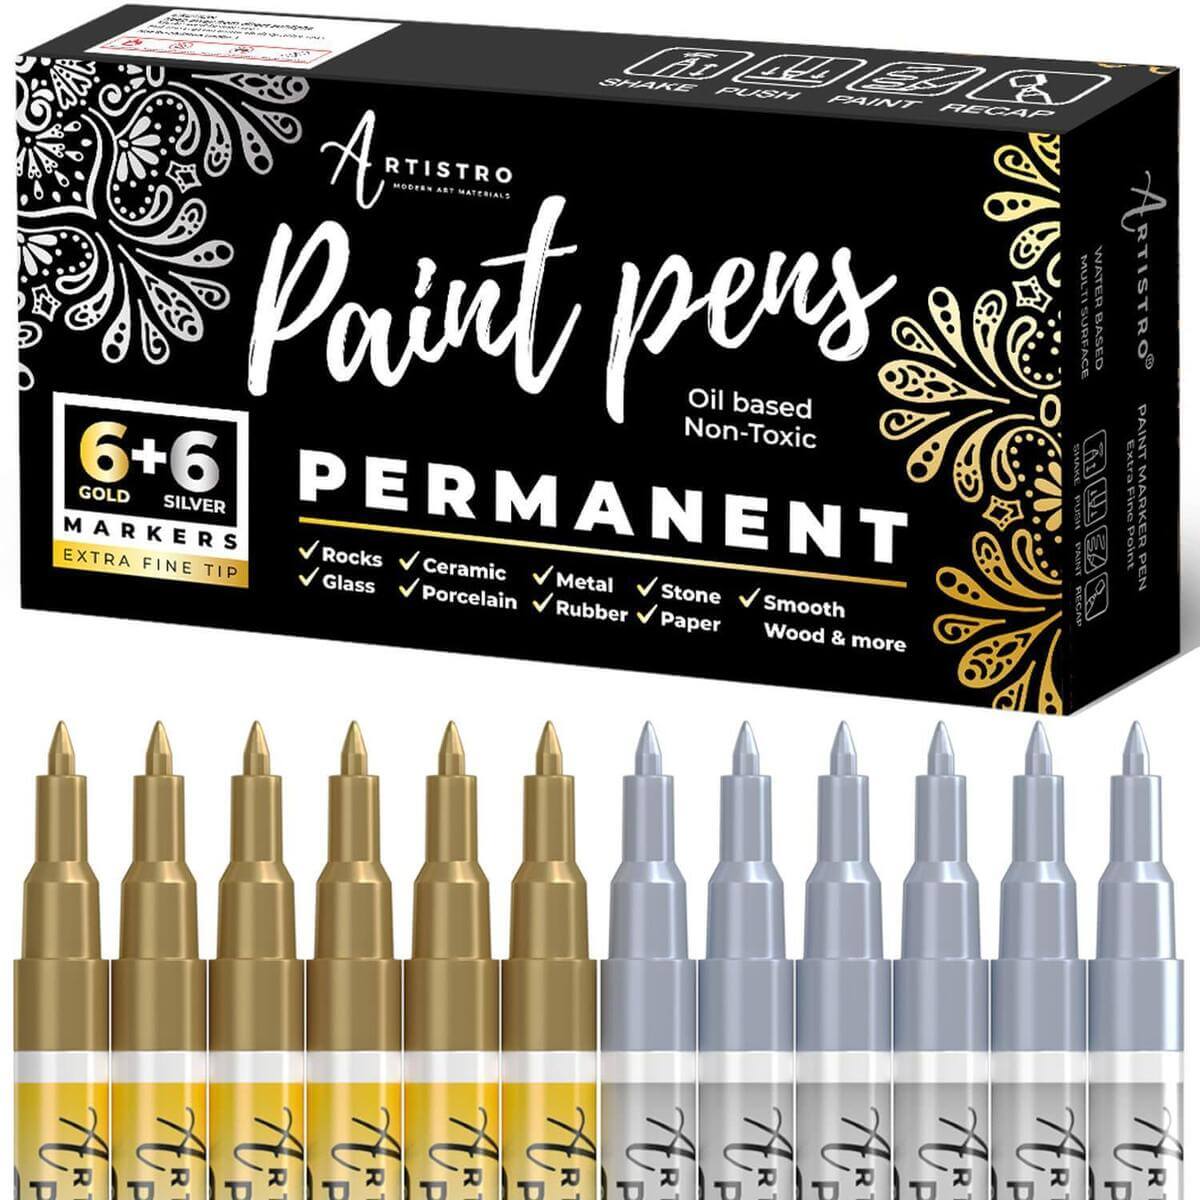 Extra Fine Tip Acrylic paint pen gold & silver - Set of 6 gold marker pens